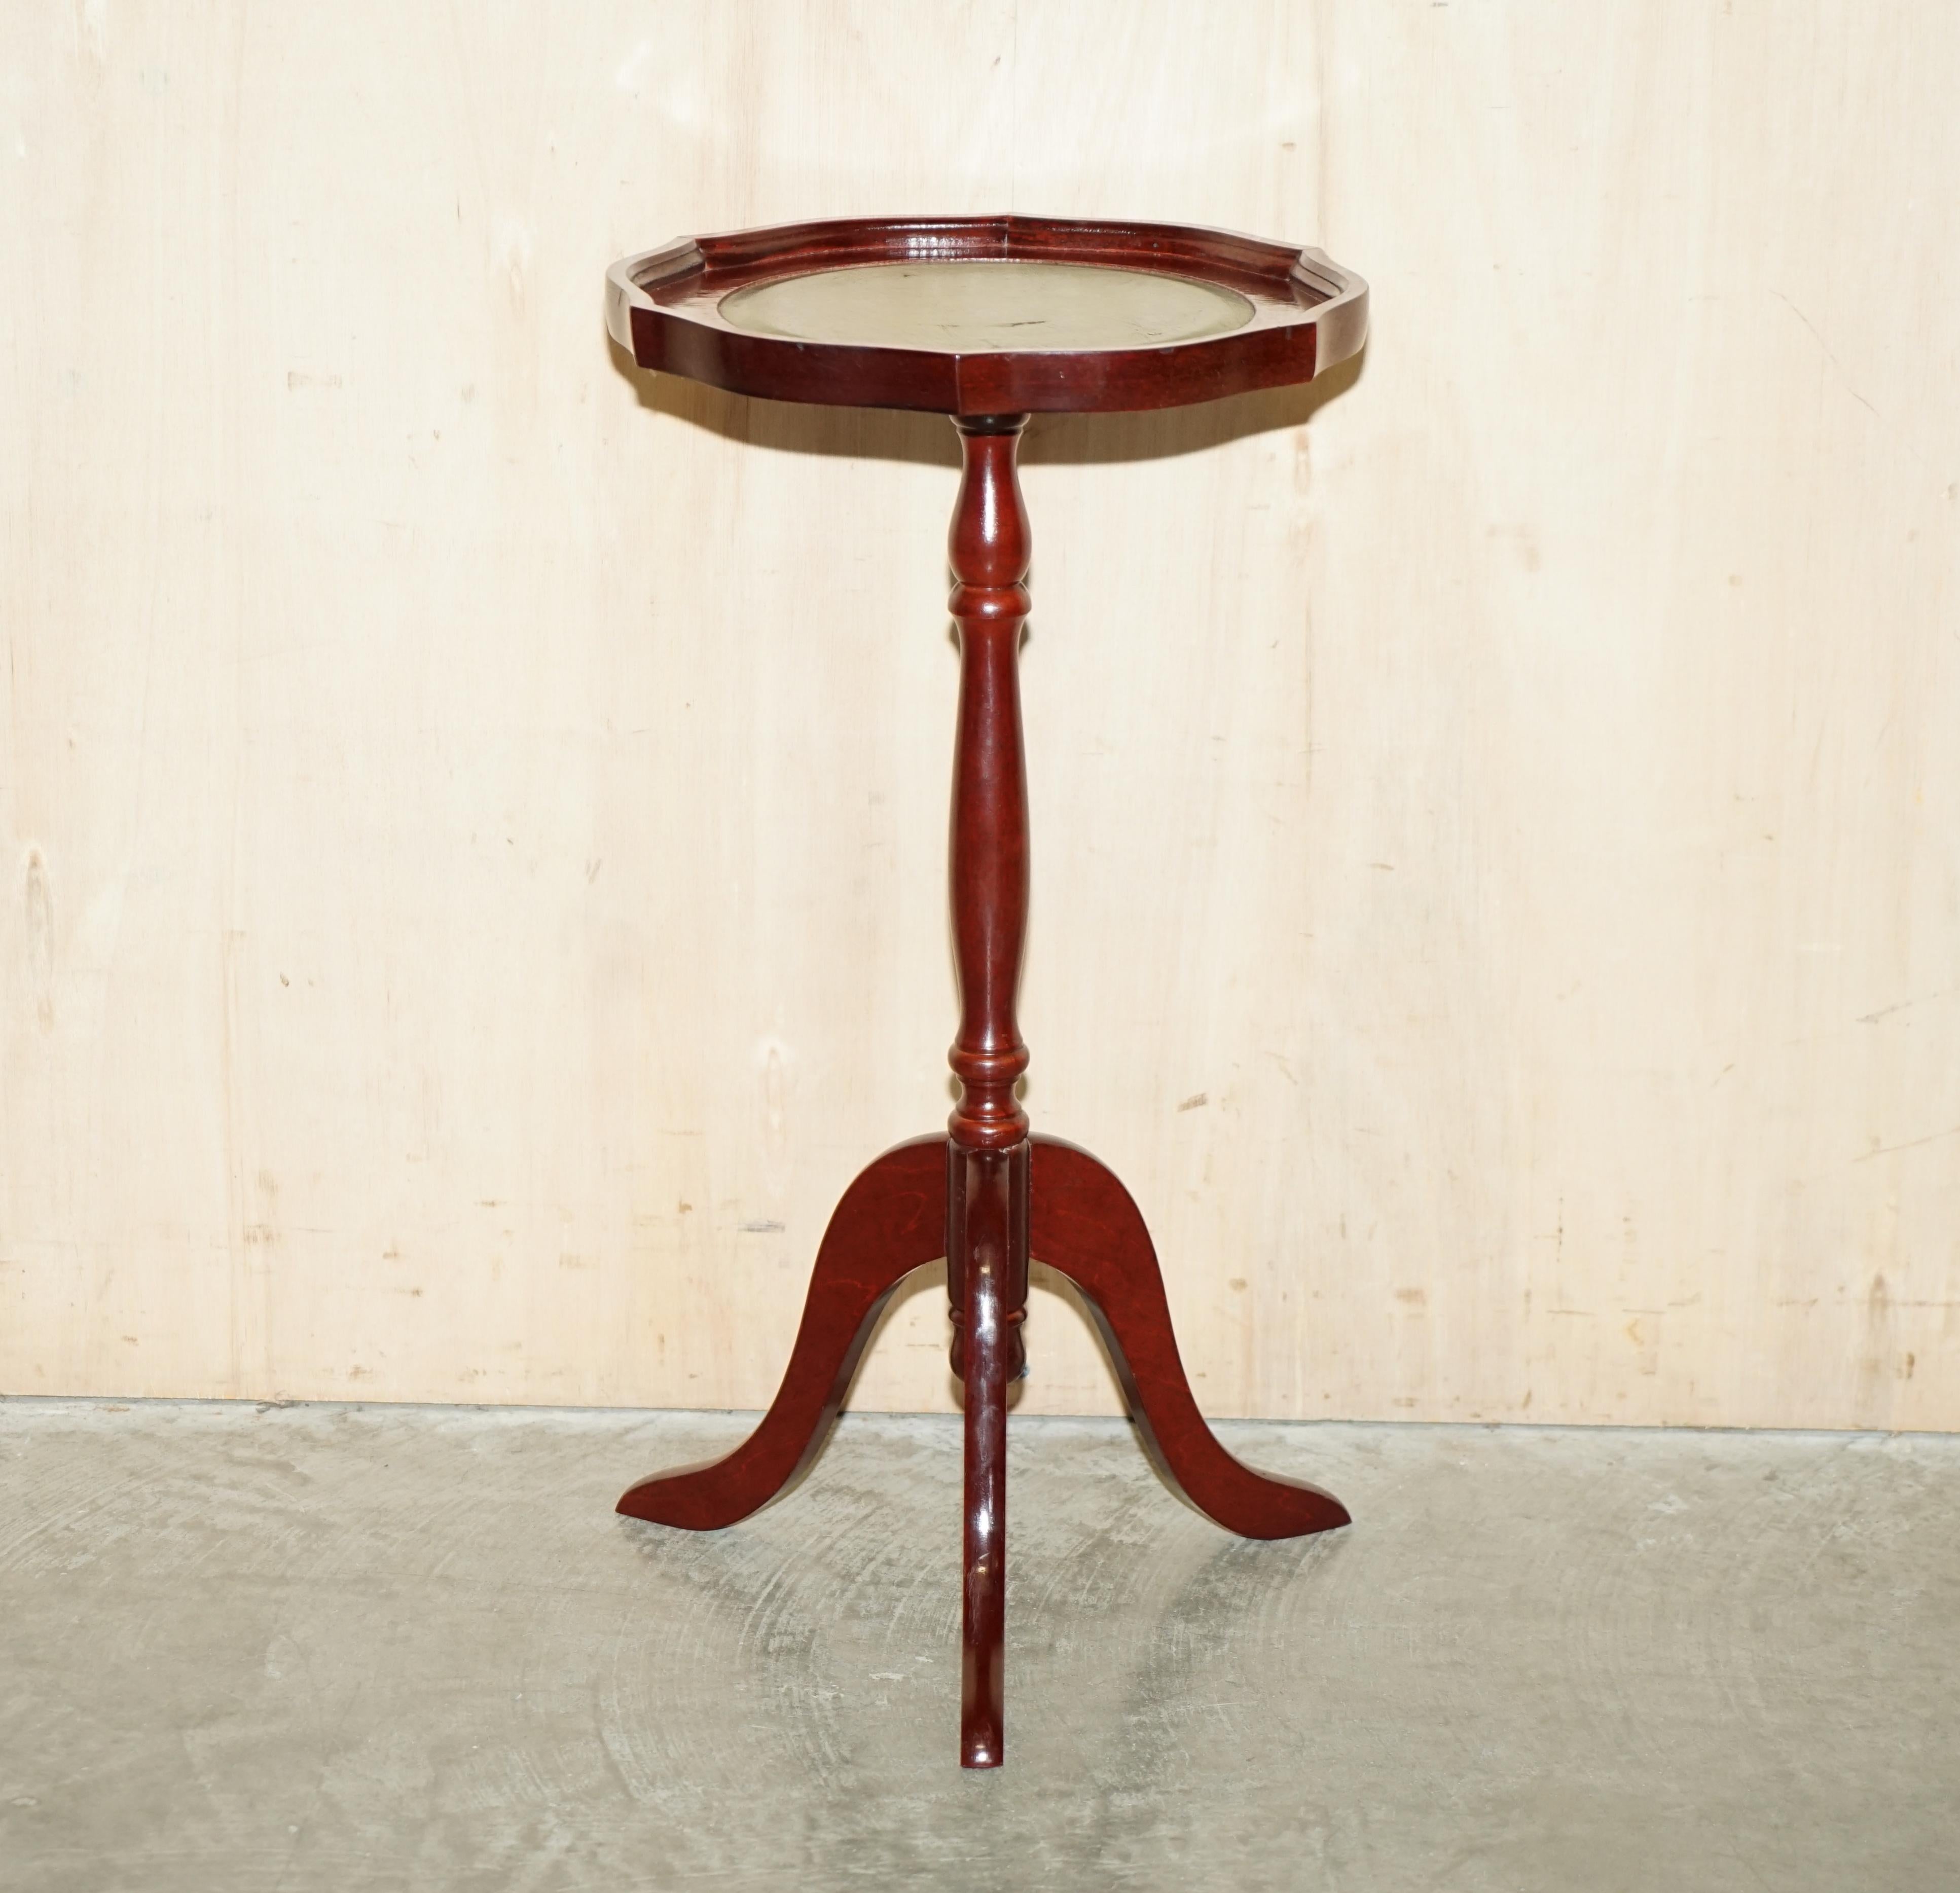 We are delighted to offer for sale this very nice vintage Bevan Funnell mahogany & heritage green leather topped tripod table

A good looking and well made piece, ideally suited for a lamp or glass of wine with a picture frame on it

It has been